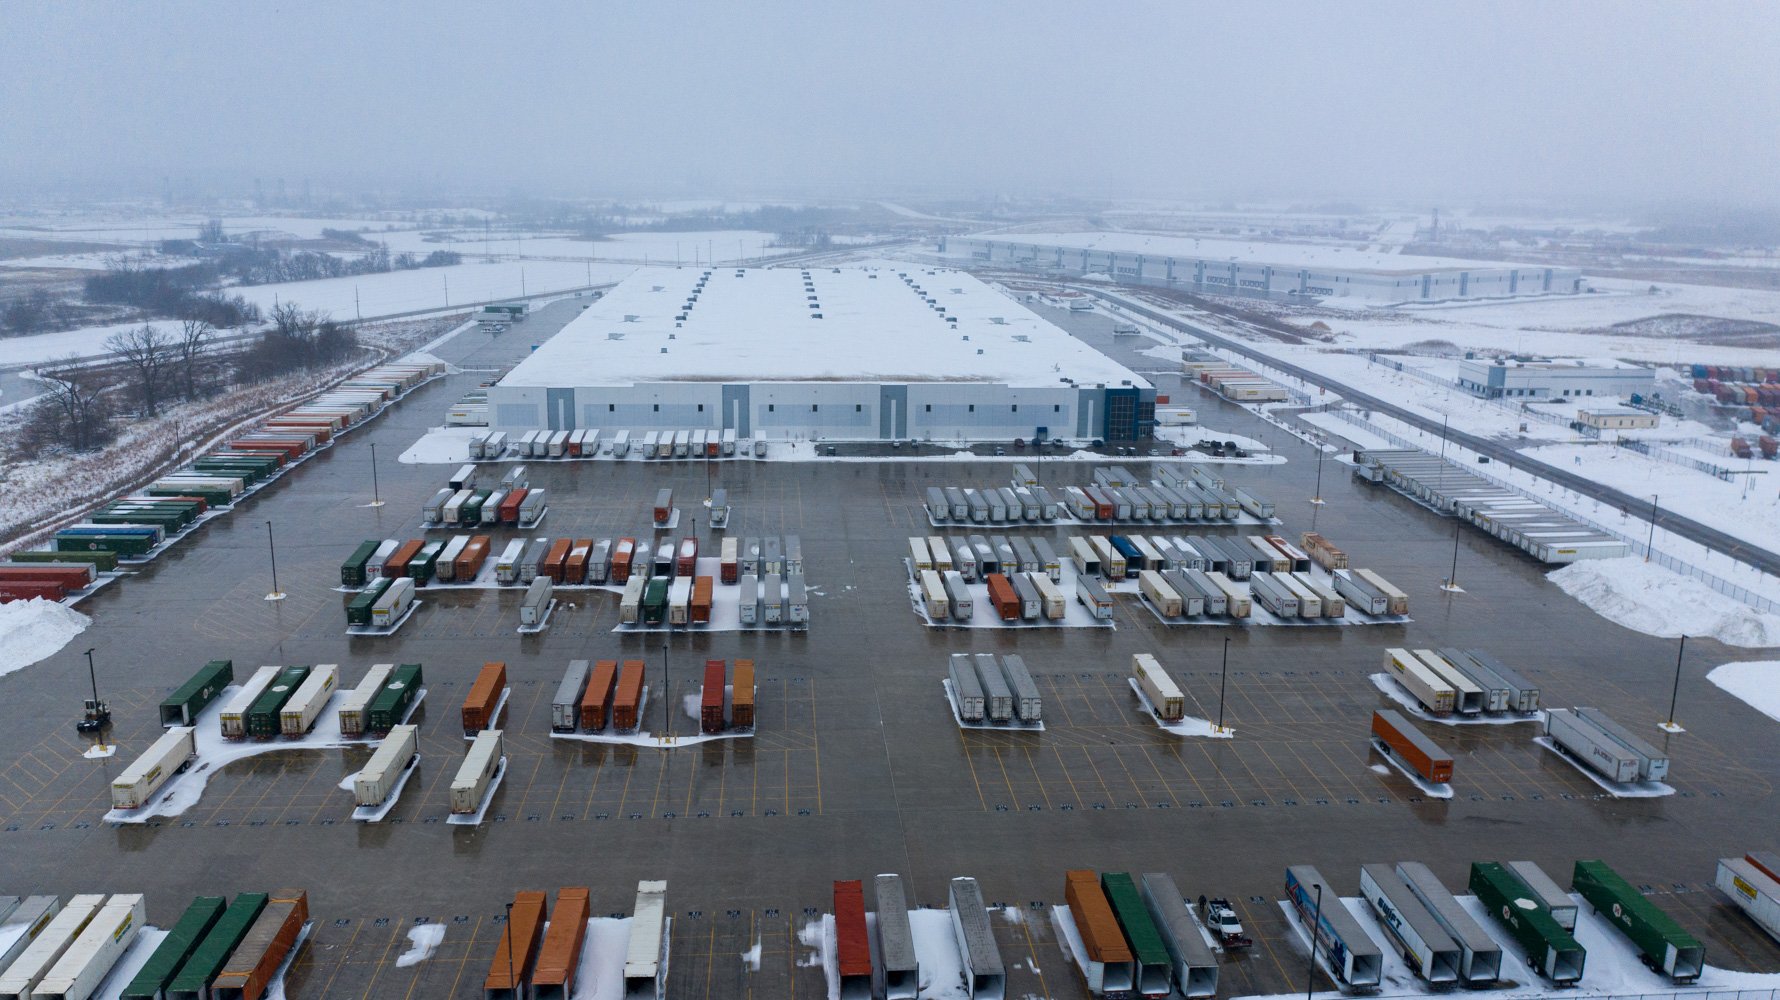 aerial view of commercial facility parking lot showing completed snow removal service